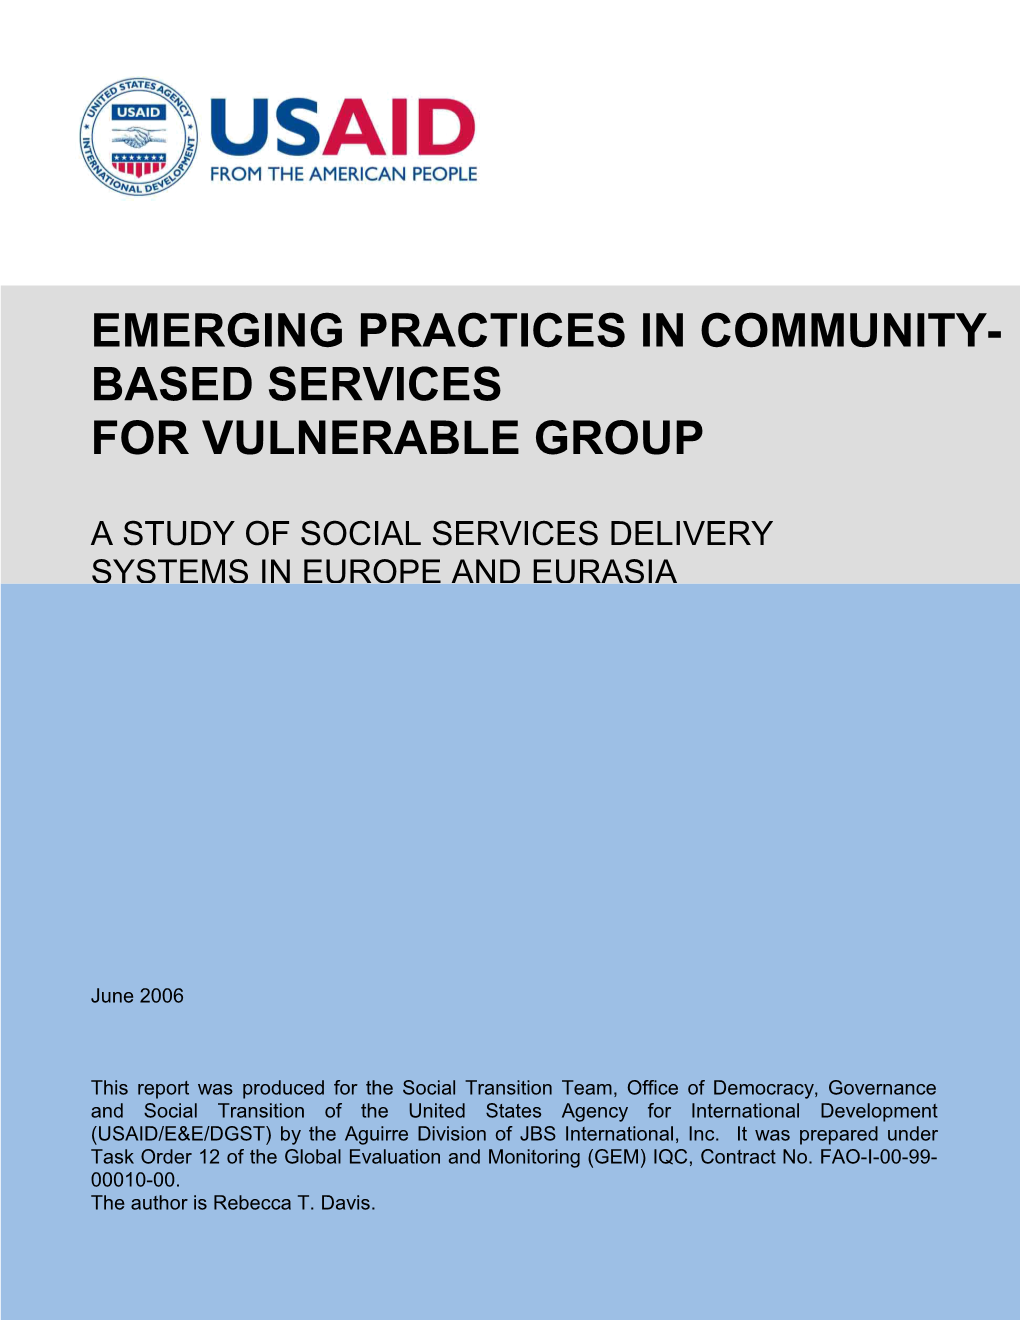 Emerging Practices in Community-Based Services for Vulnerable Groups